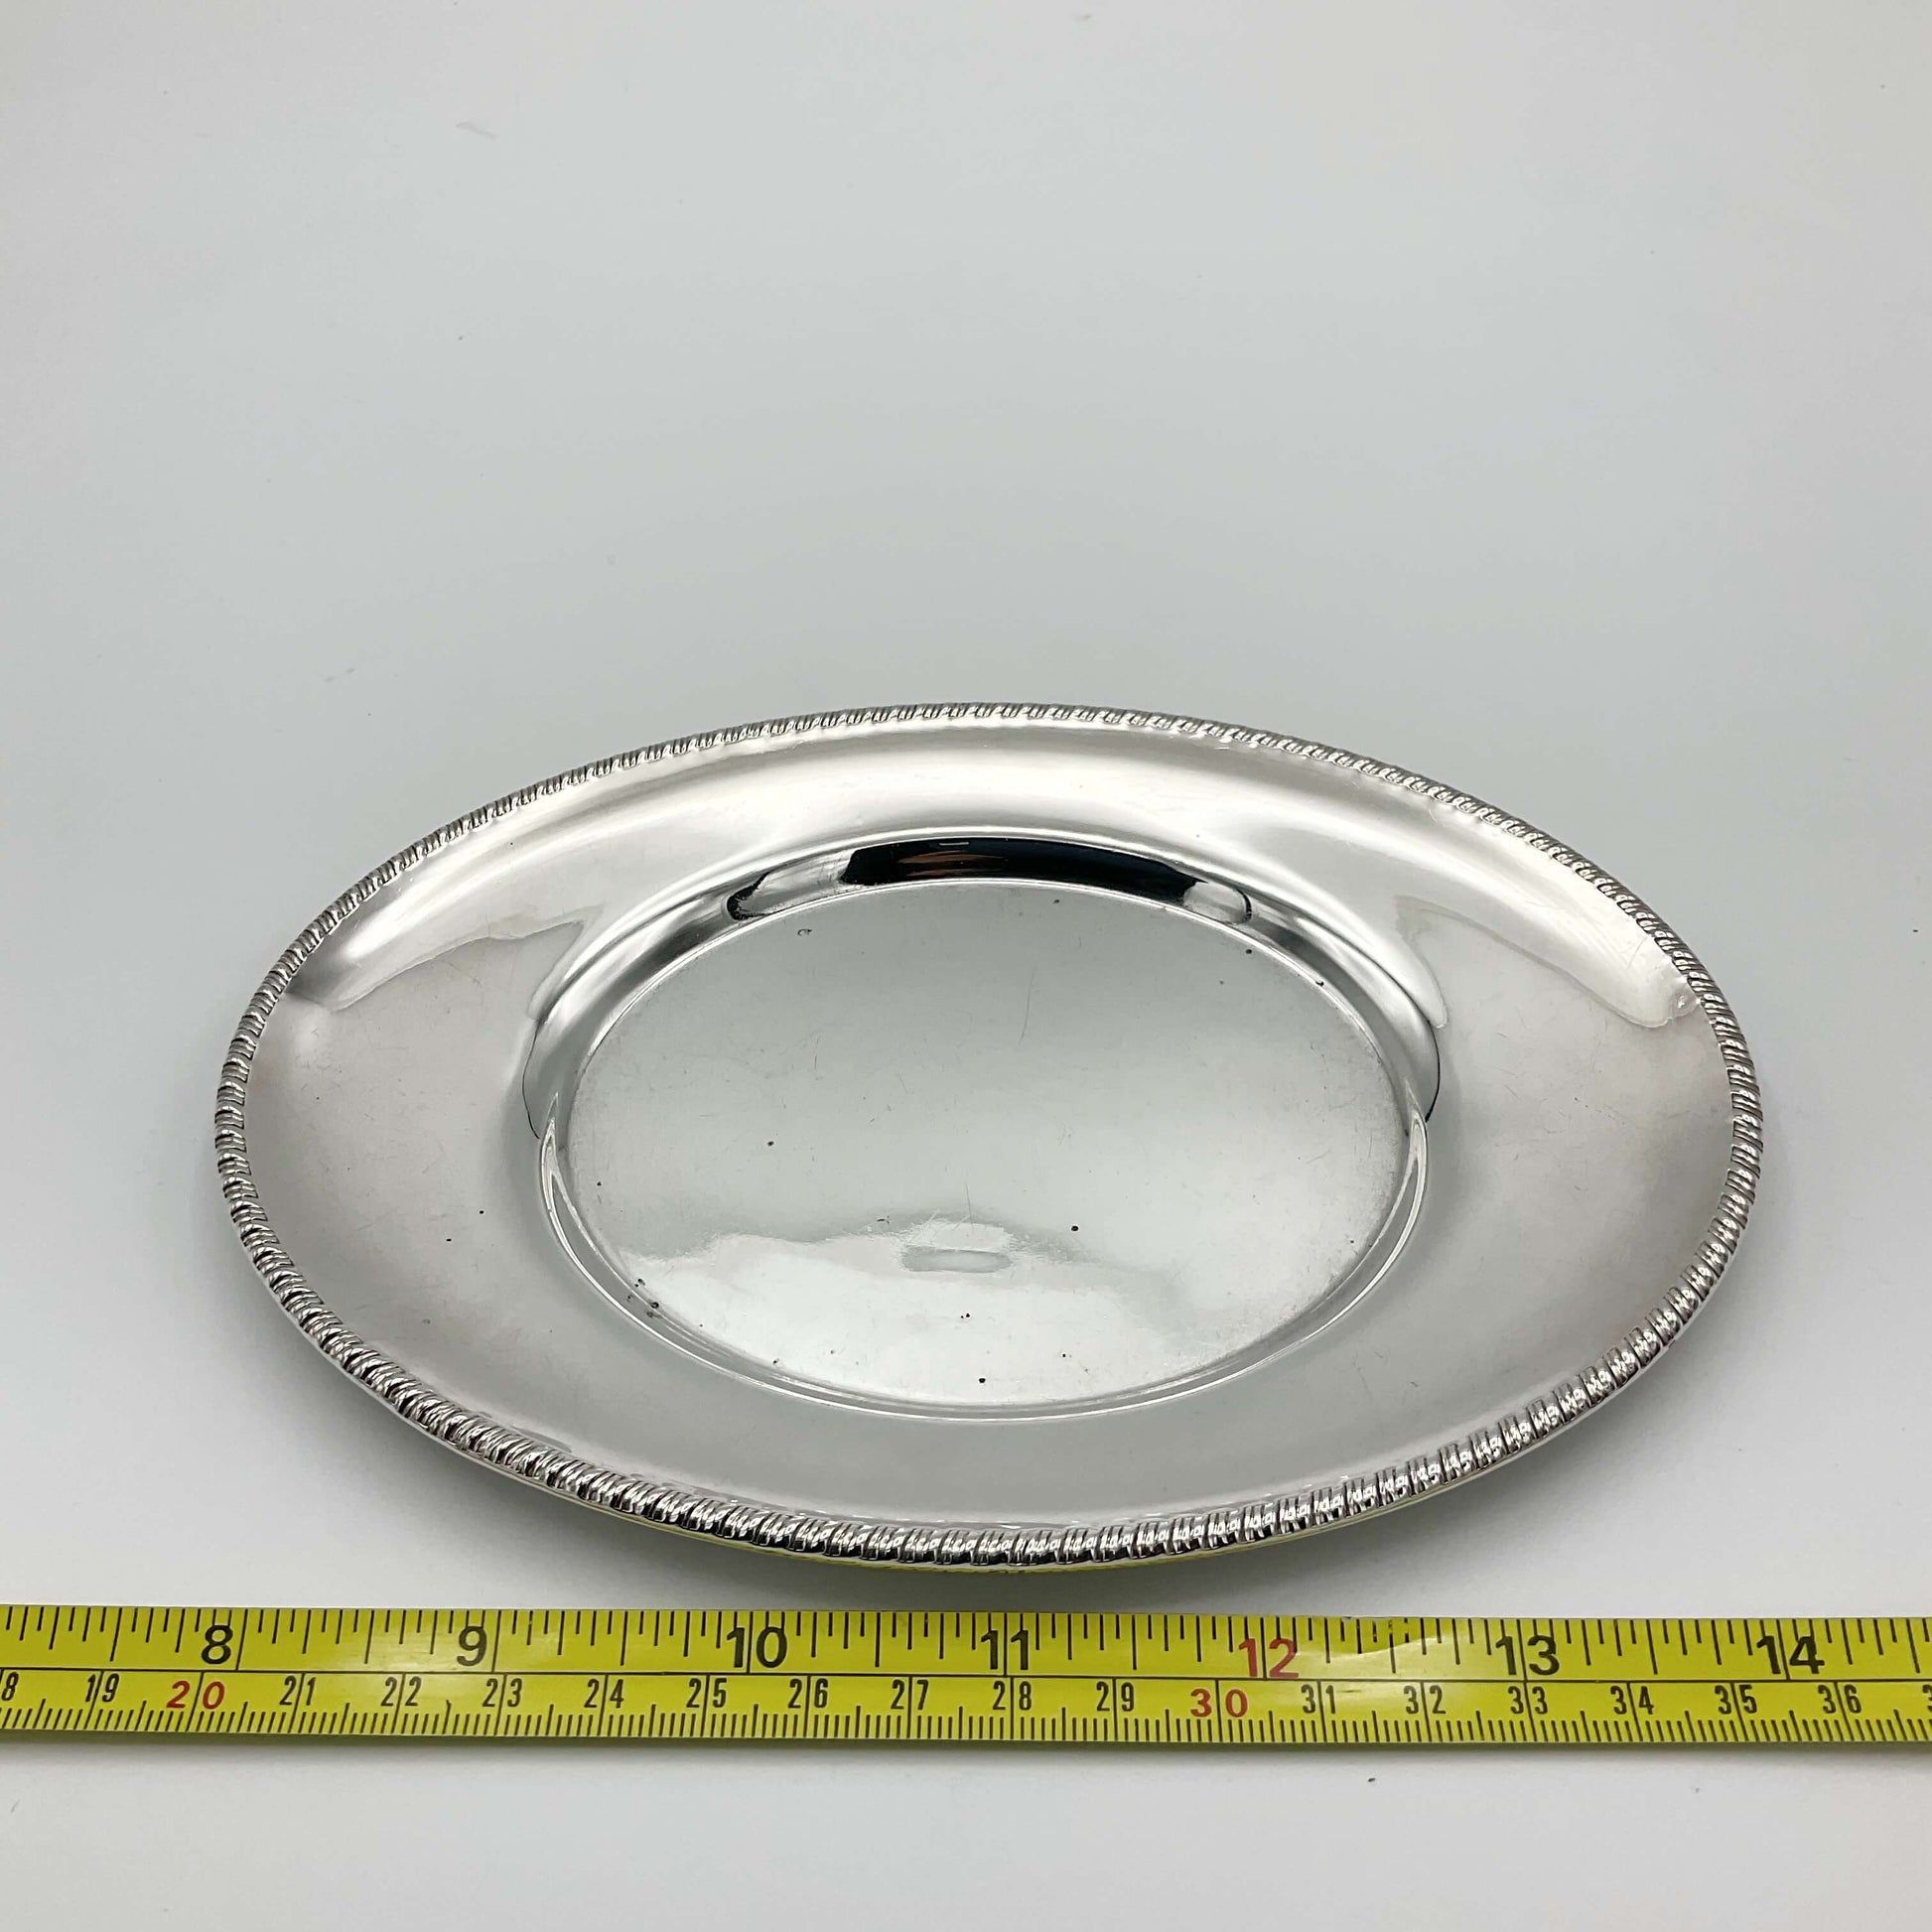 Silver plated tray next to tape measure showing size as approximately 16cm